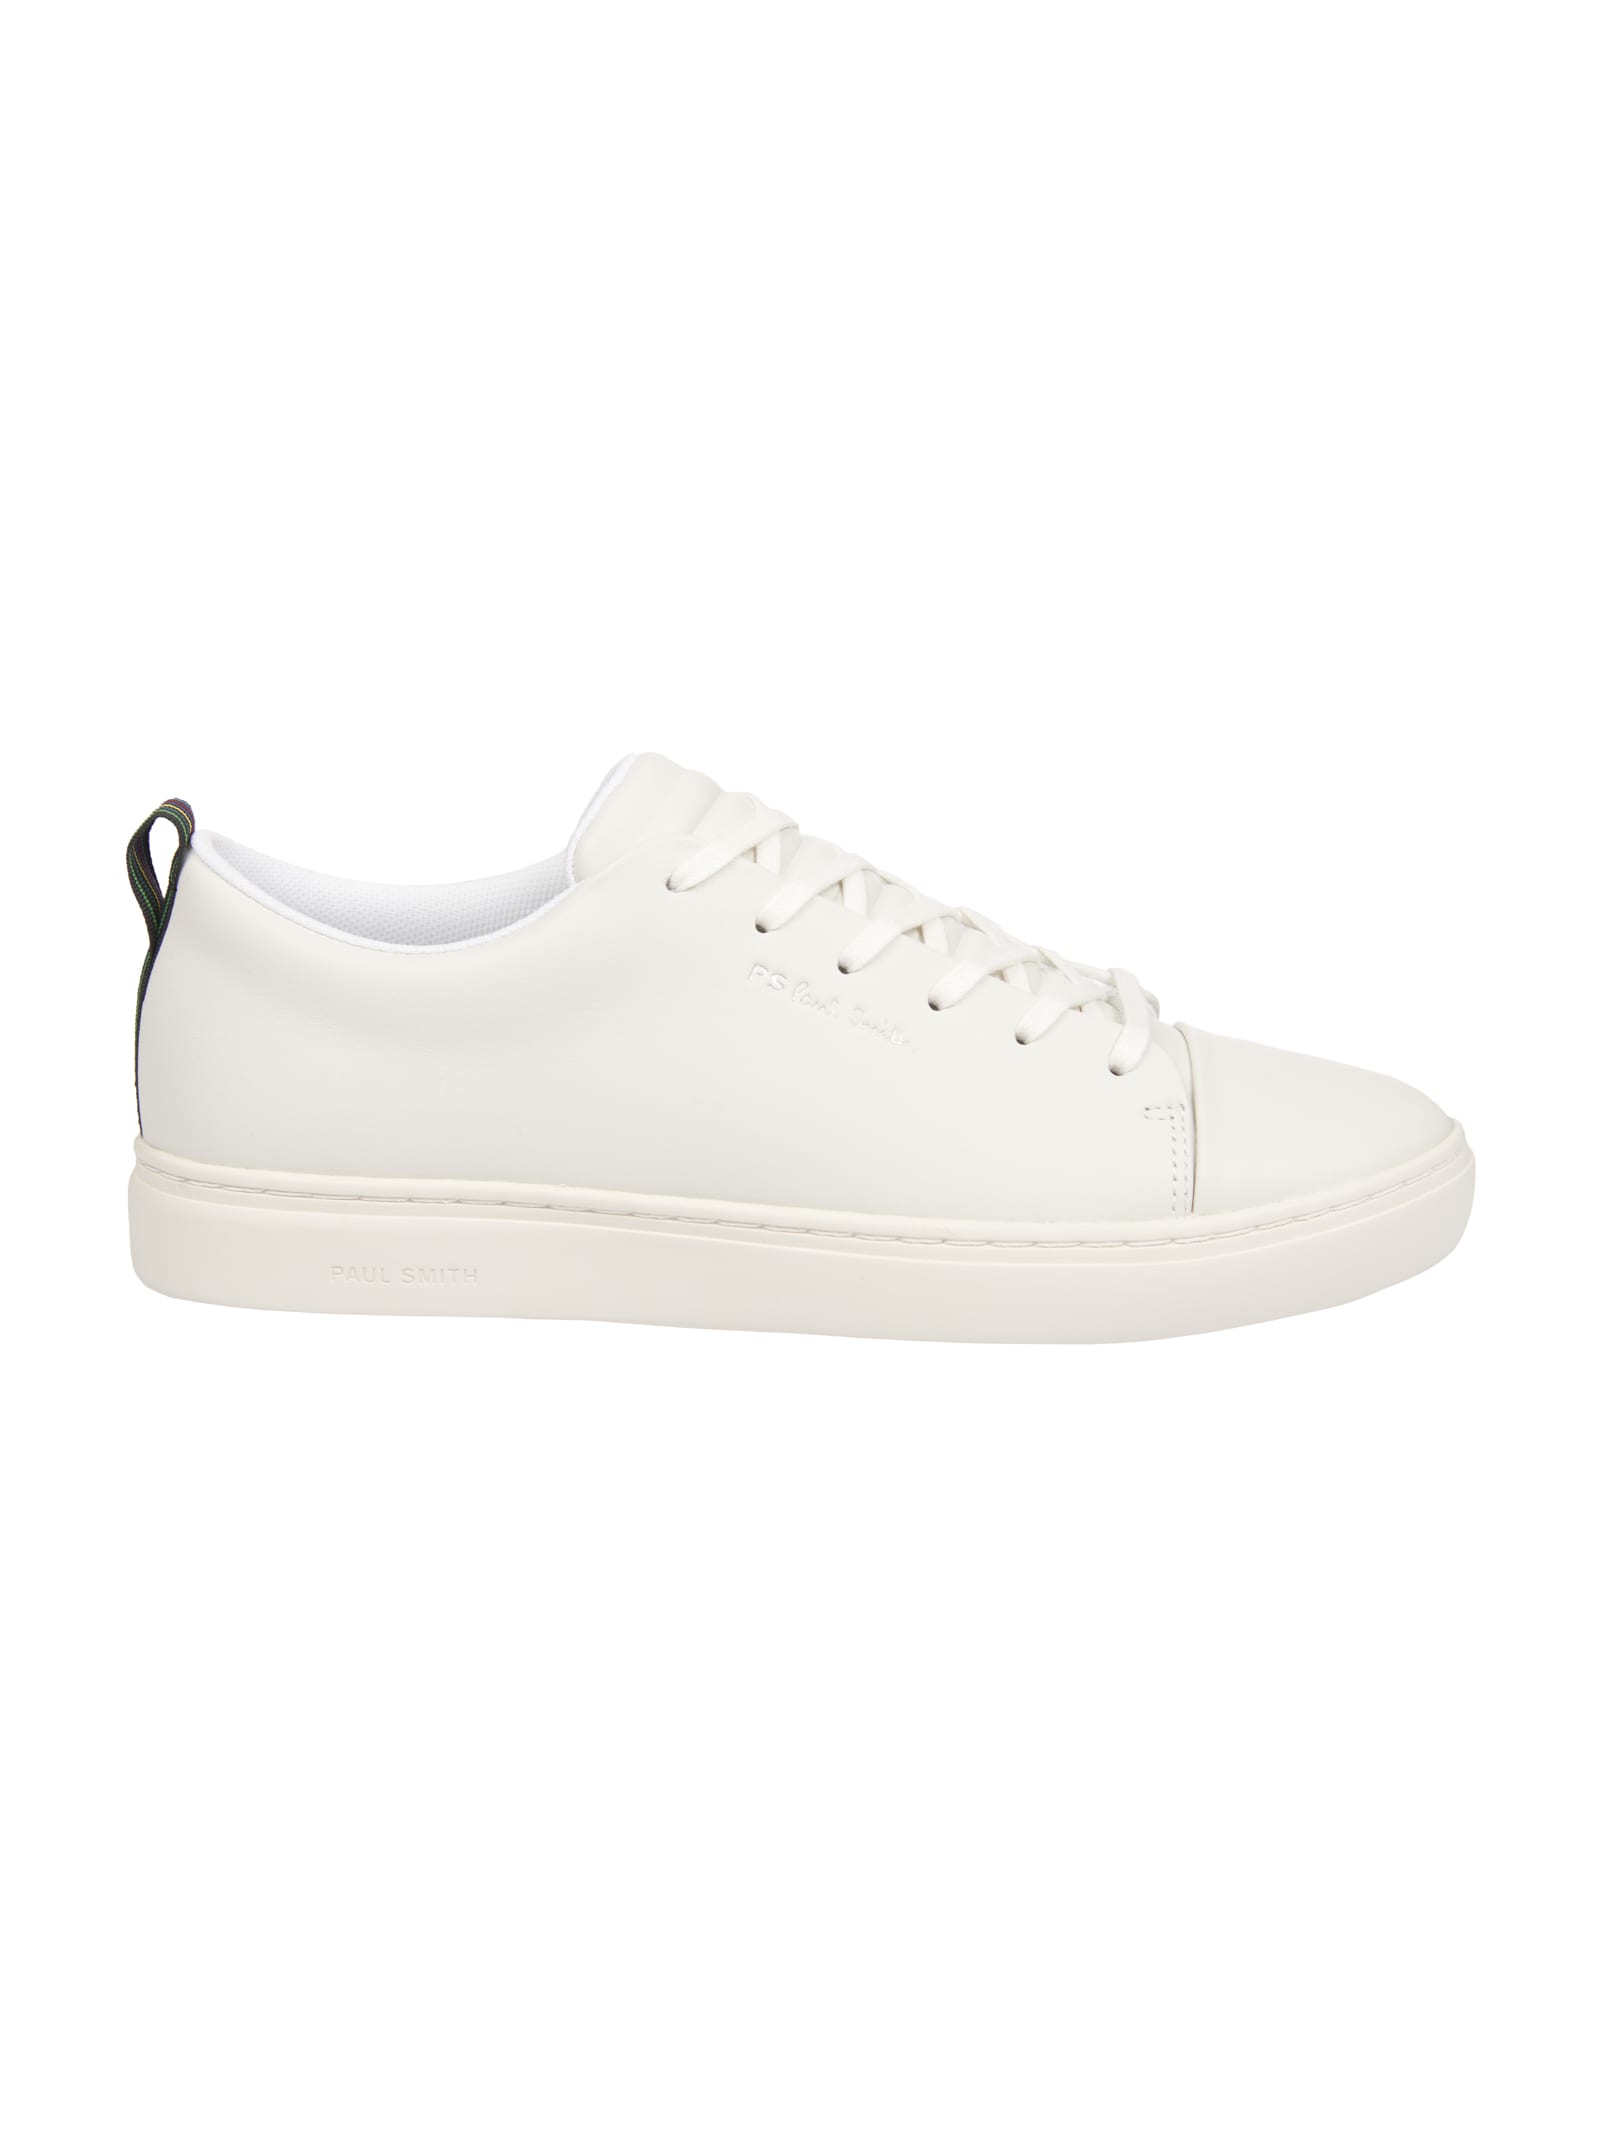 Paul Smith Lee Striped Leather Trainers In White | ModeSens